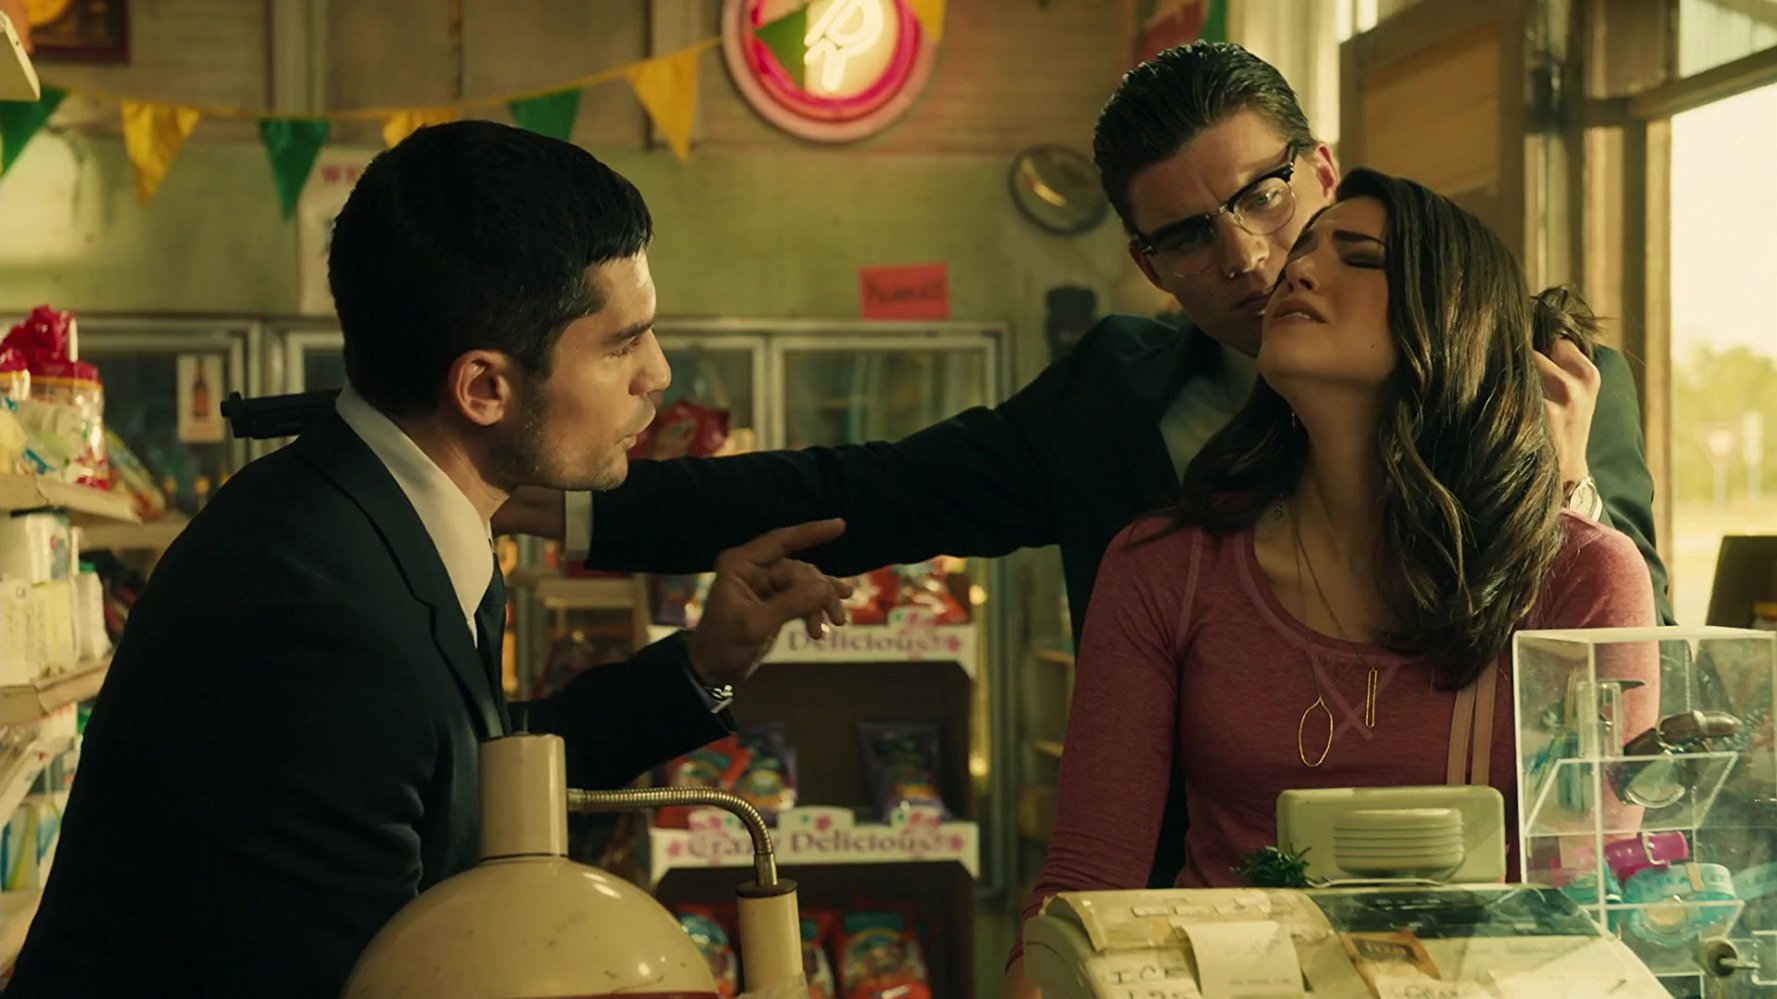 from dusk till dawn cast series seth and kate